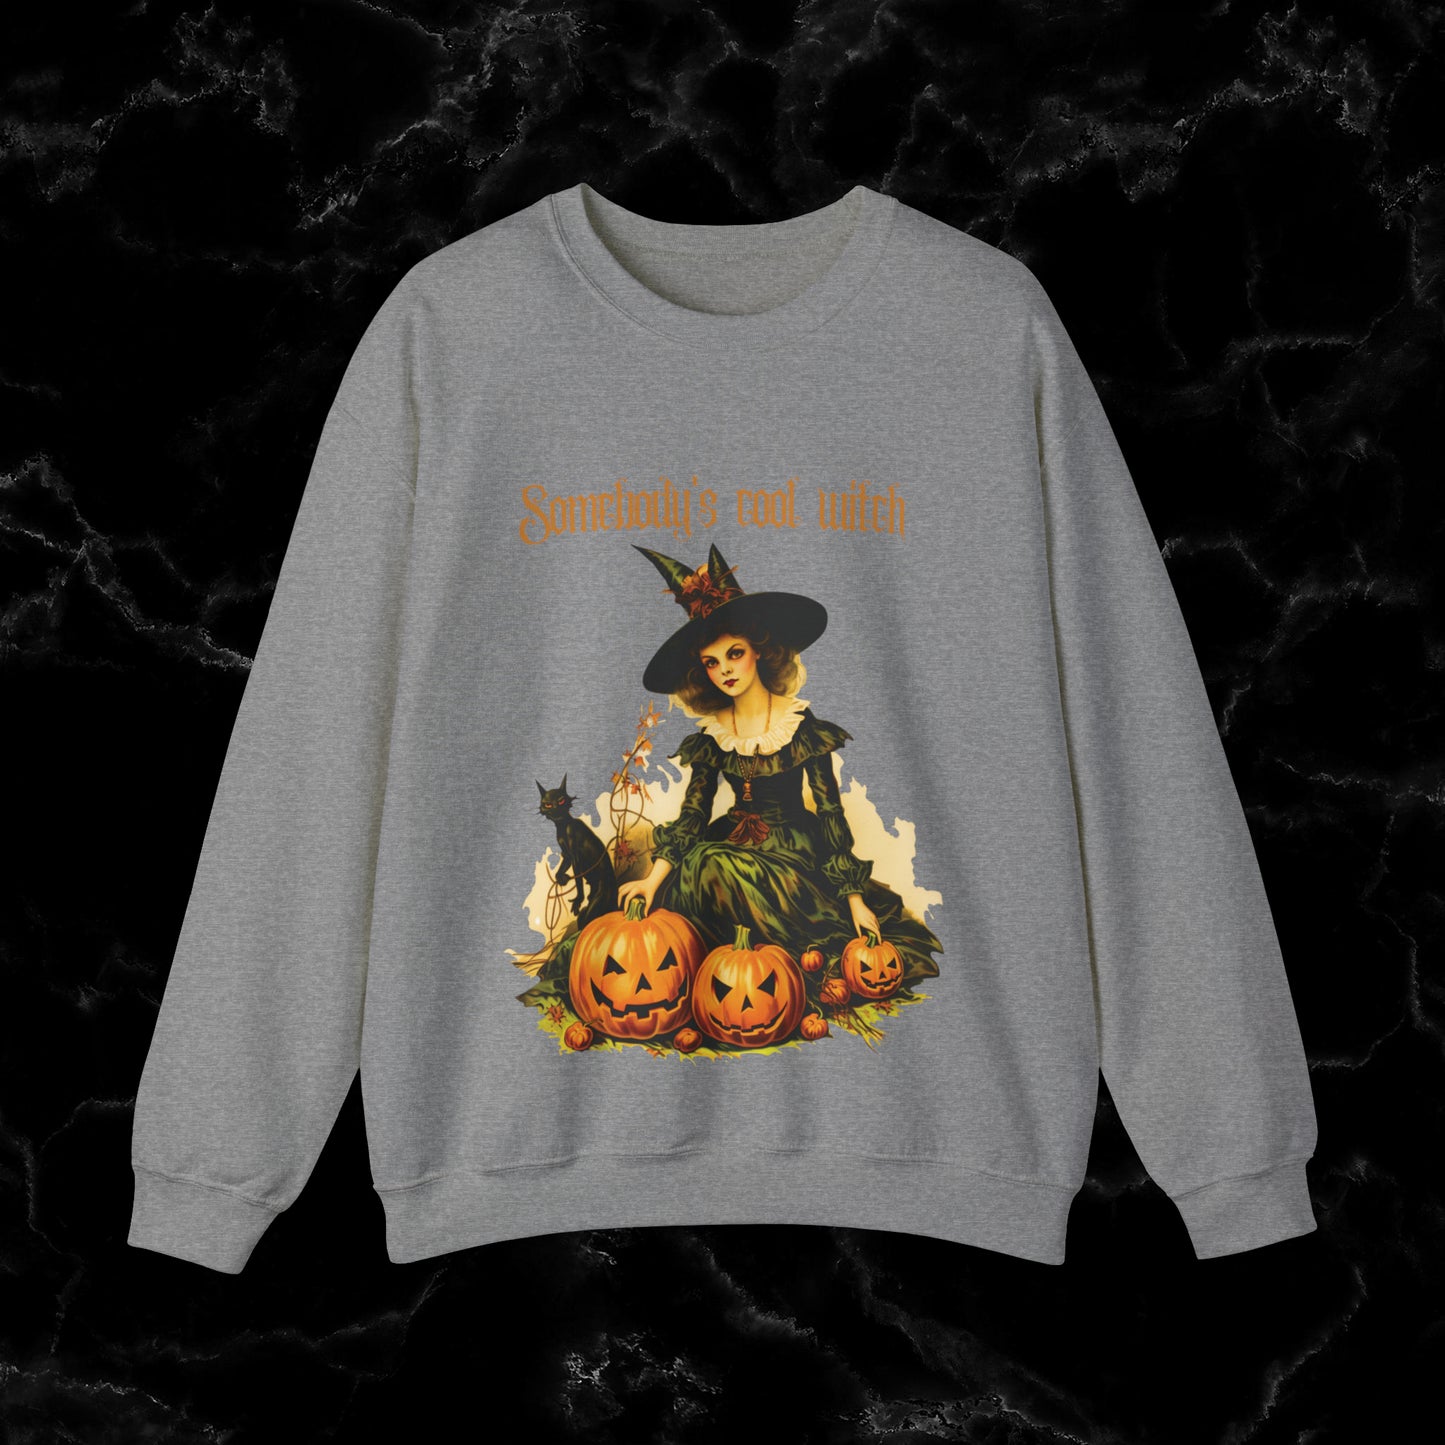 Somebody's Cool Witch Halloween Sweatshirt - Embrace the Witchy Vibes Sweatshirt S Graphite Heather 